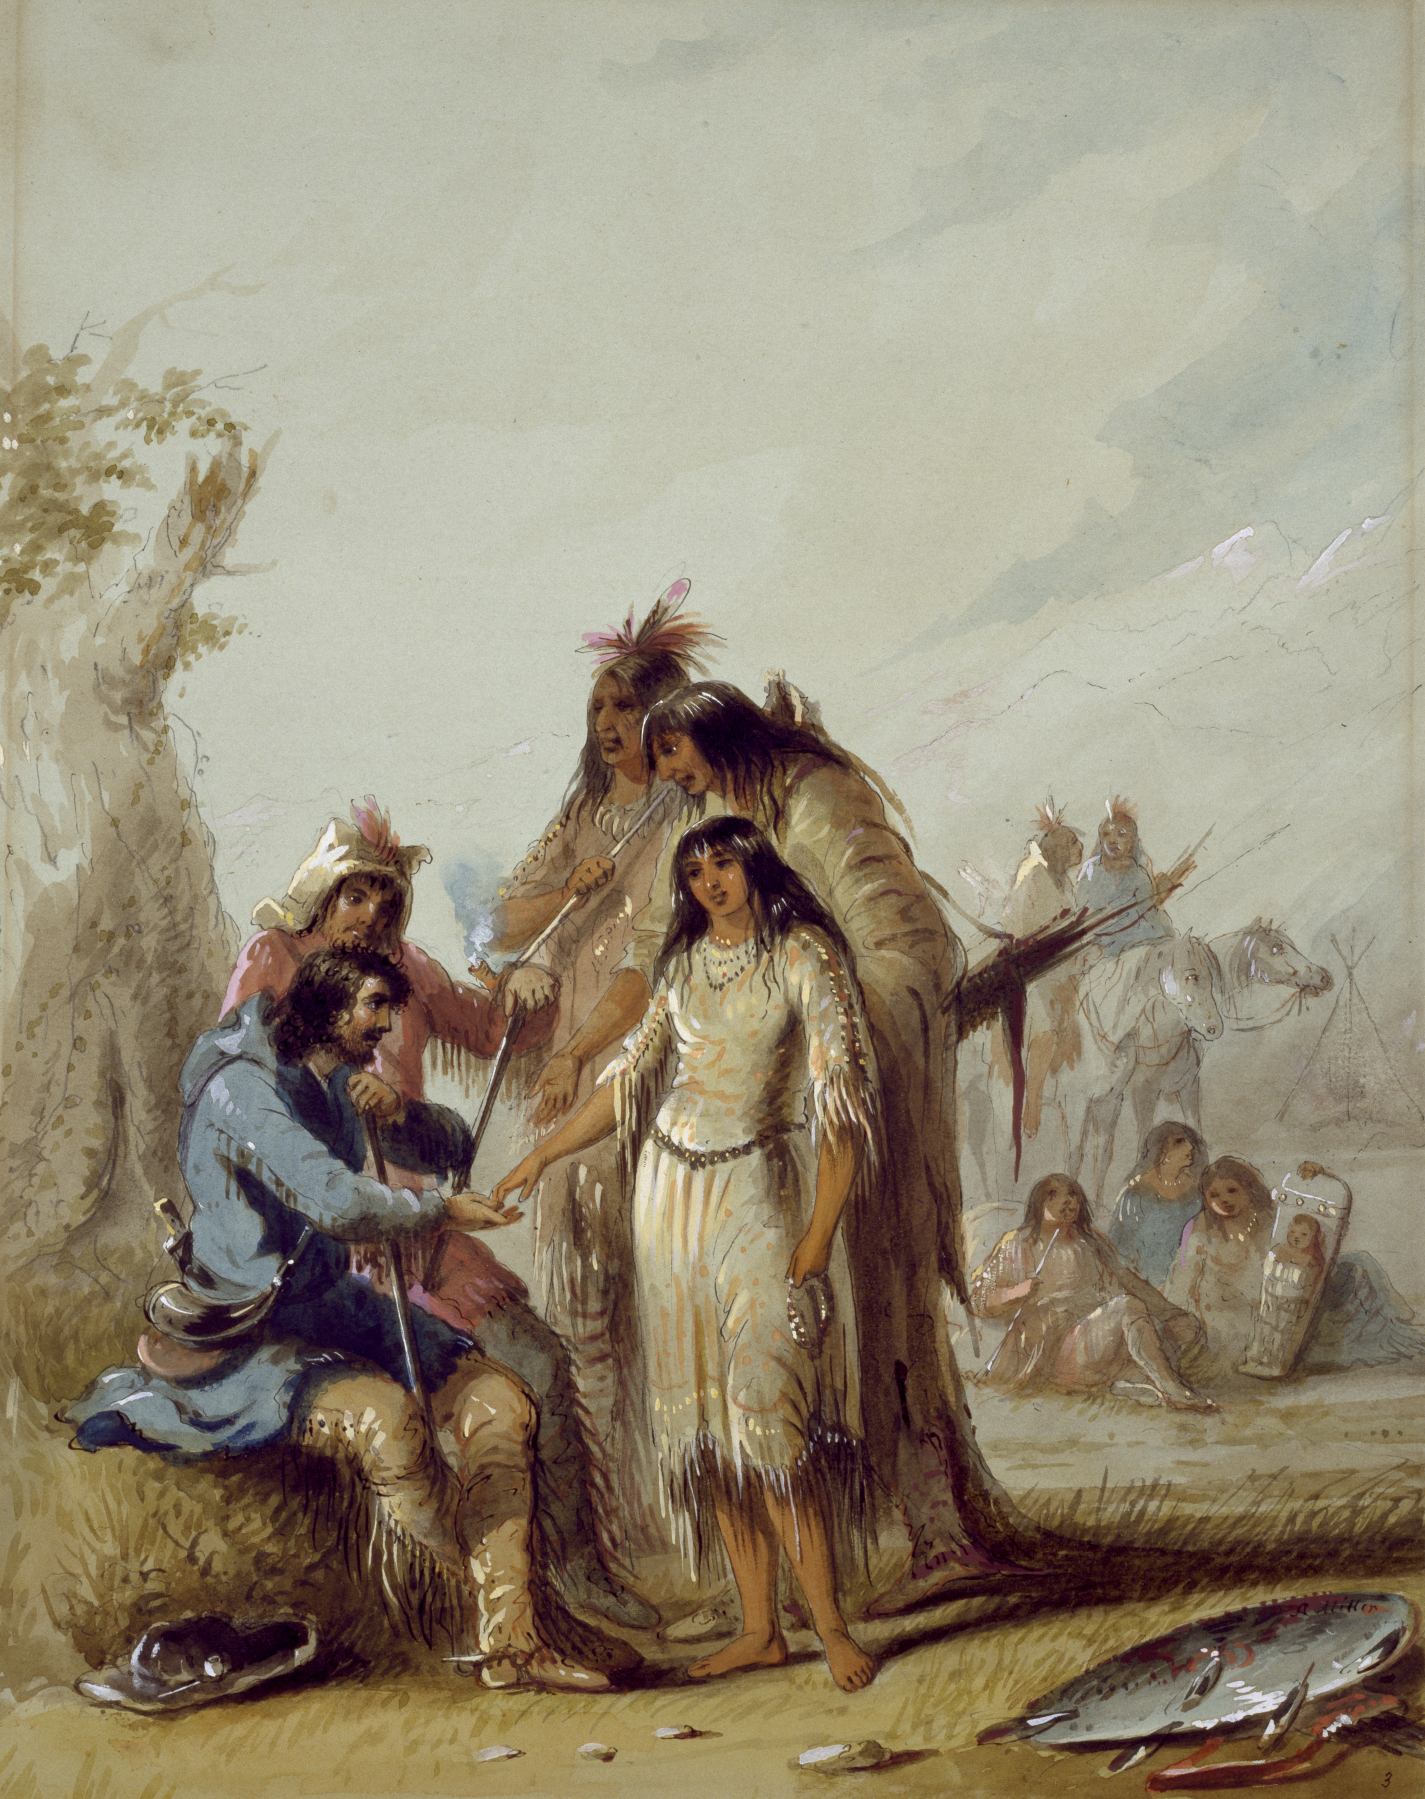 The Trapper's Bride by  Alfred Jacob Miller, 1859